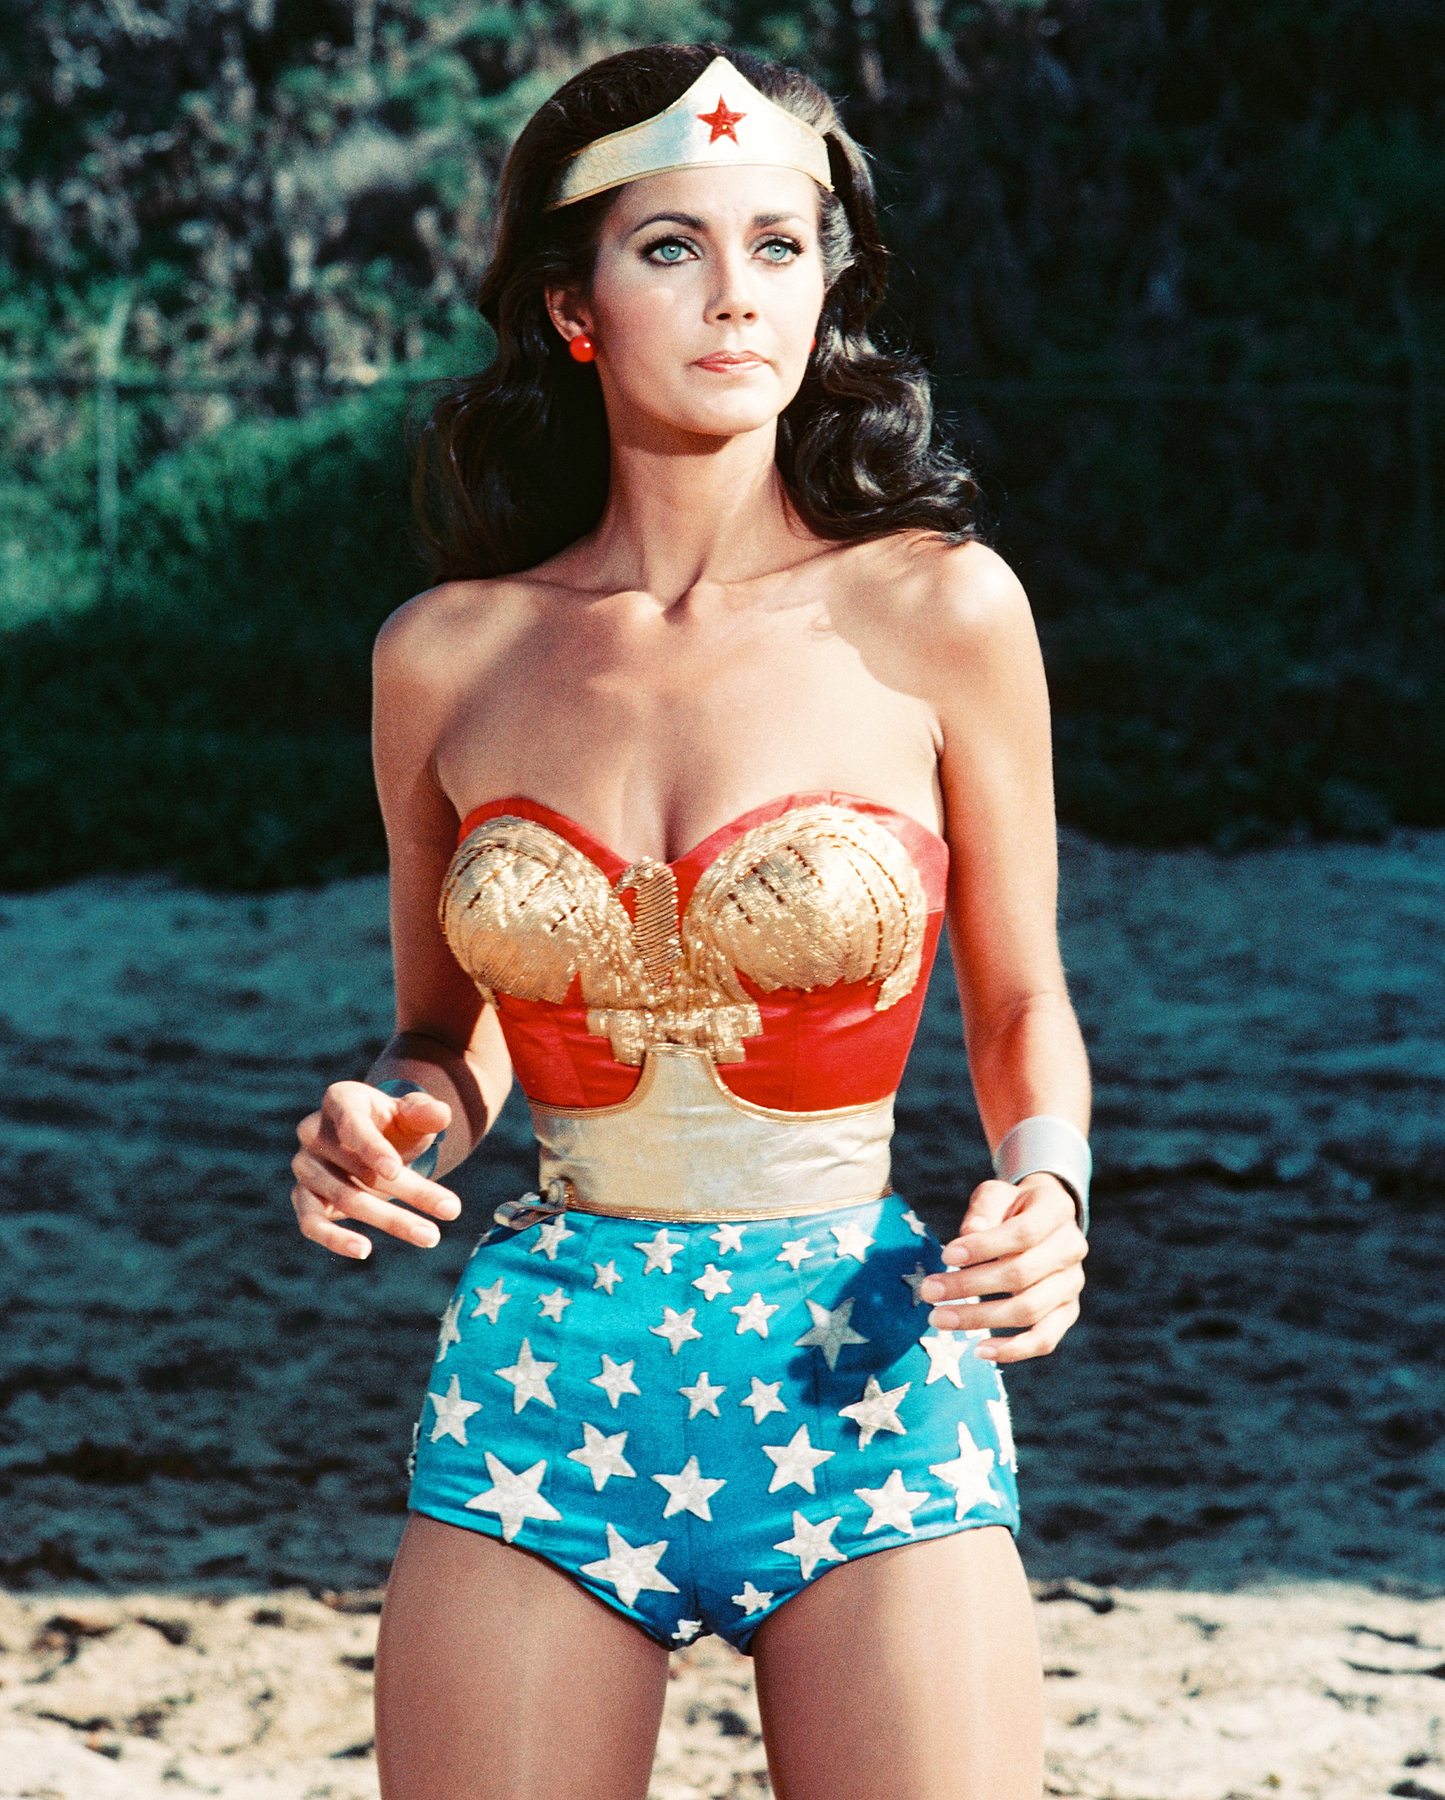 Asteria is played by lynda carter, who famously stared as wonder woman in t...